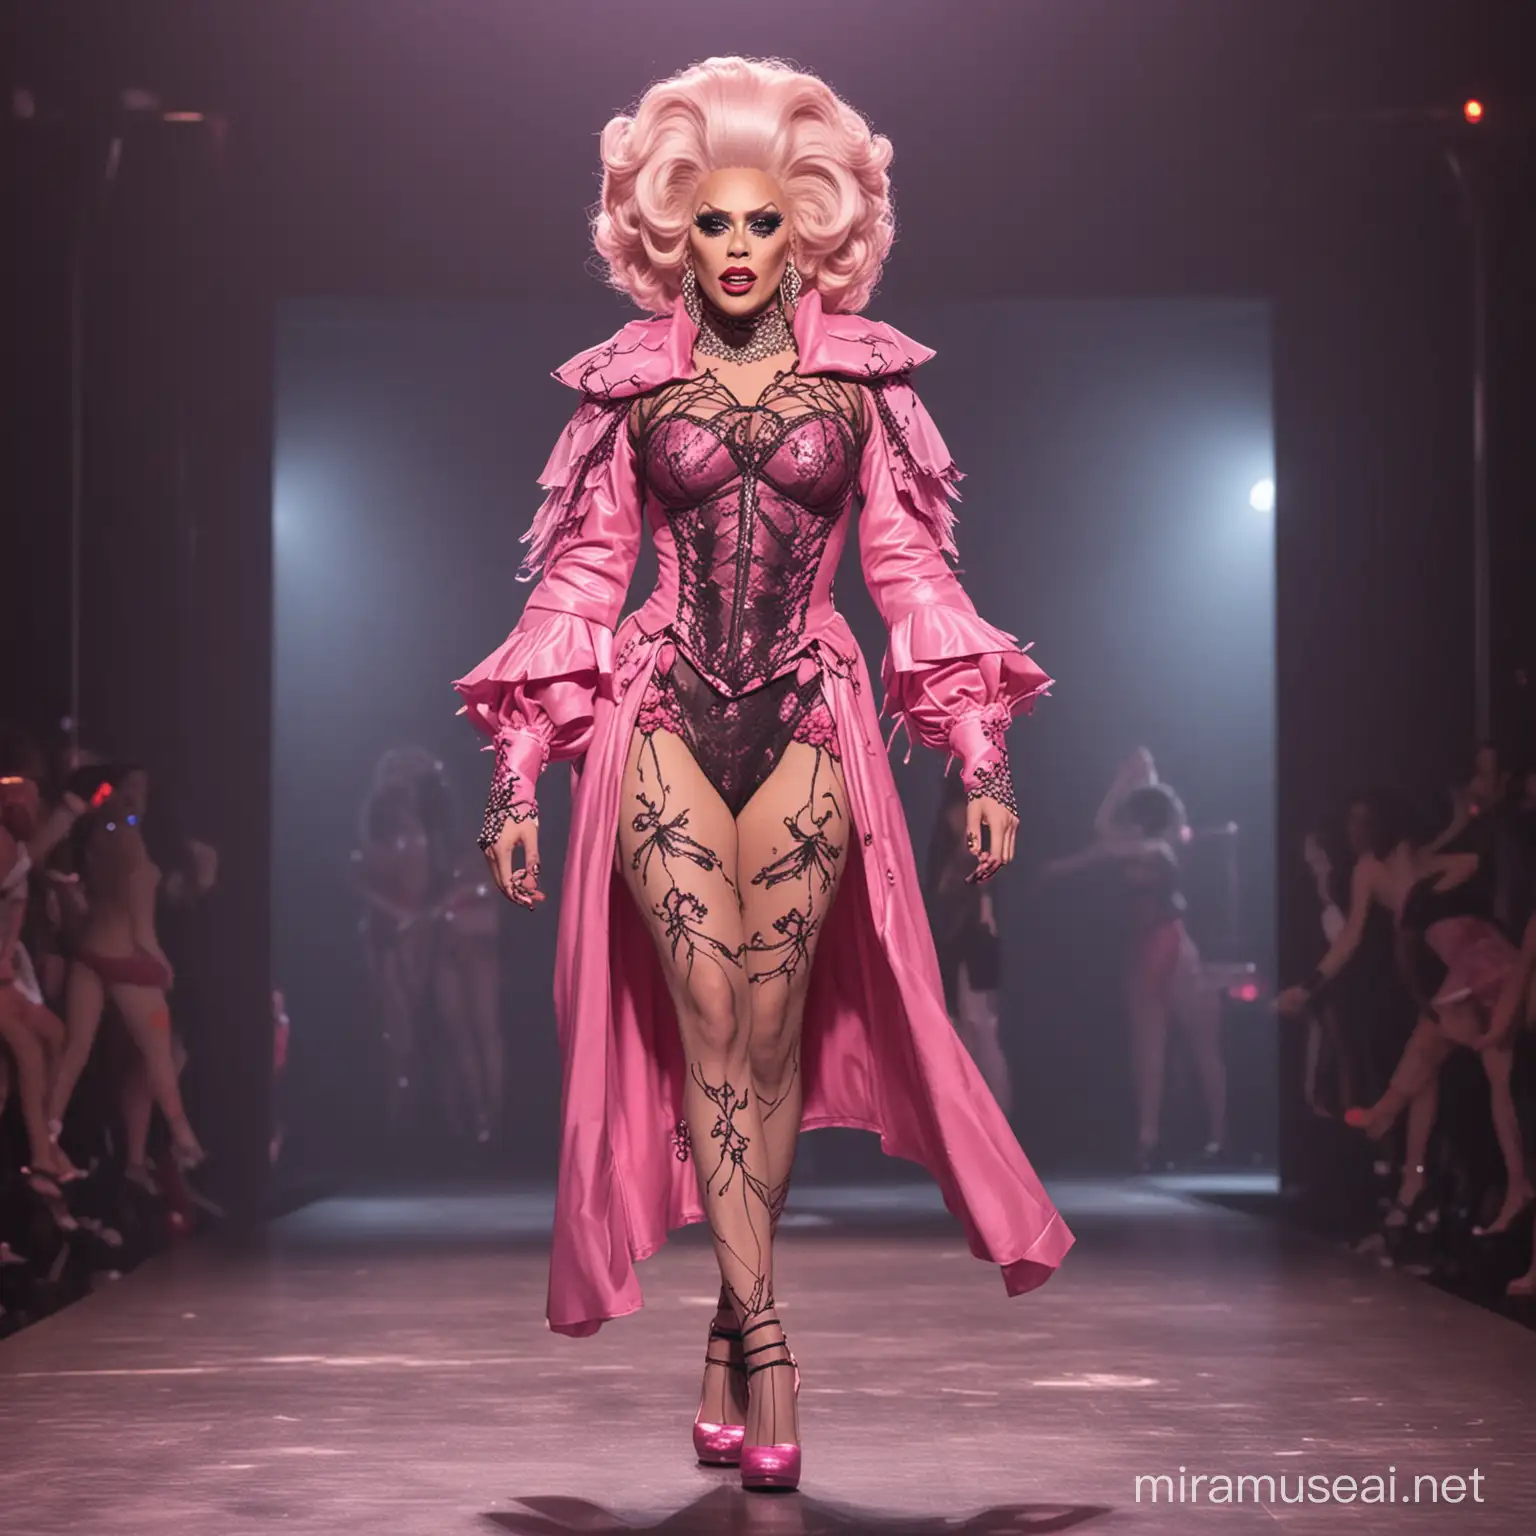 a full body image of a skinny horror inspired drag queen walking on the Rupaul's Drag race runway wearing an outfit inspired by the prompt:  horror and gore